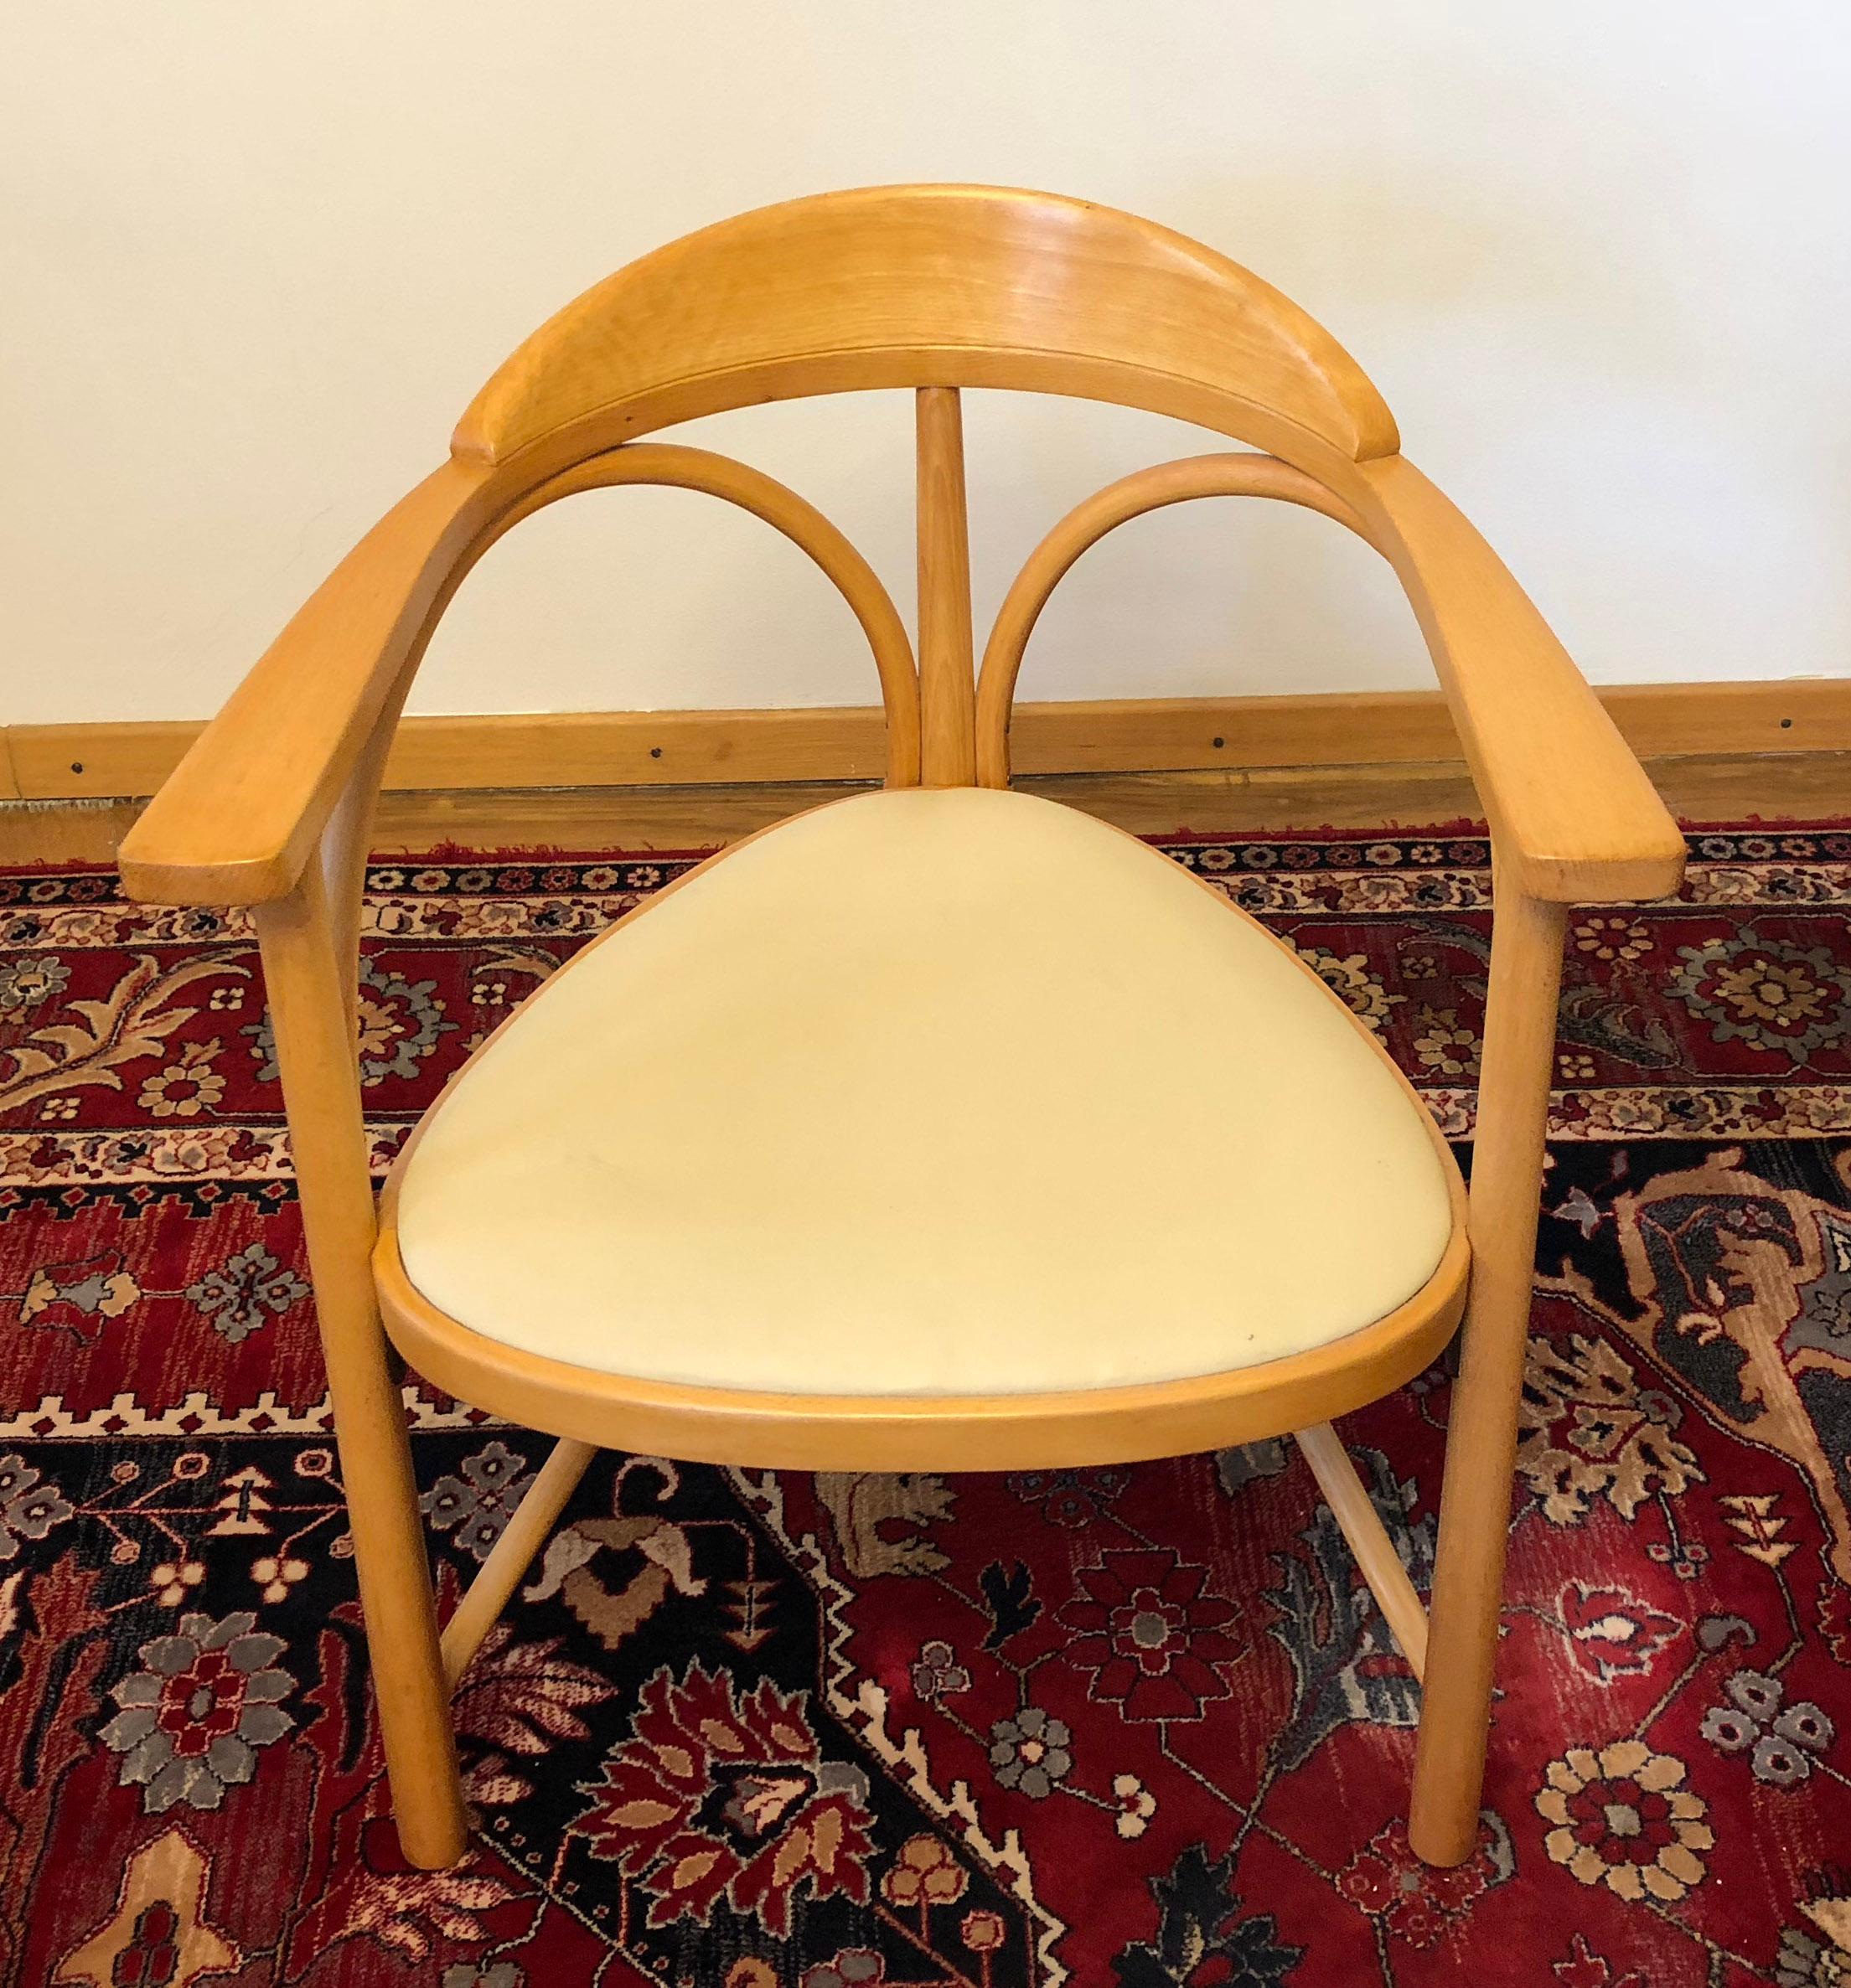 Thonet No.81 tripod beech bentwood armchair was designed in 1904, and this one is a reedition from 1986. It is no longer in production and remains in original condition.
Dimensions
H 31.5 in. x W 24.81 in. x D 20.08 in.
H 80 cm x W 63 cm x D 51 cm